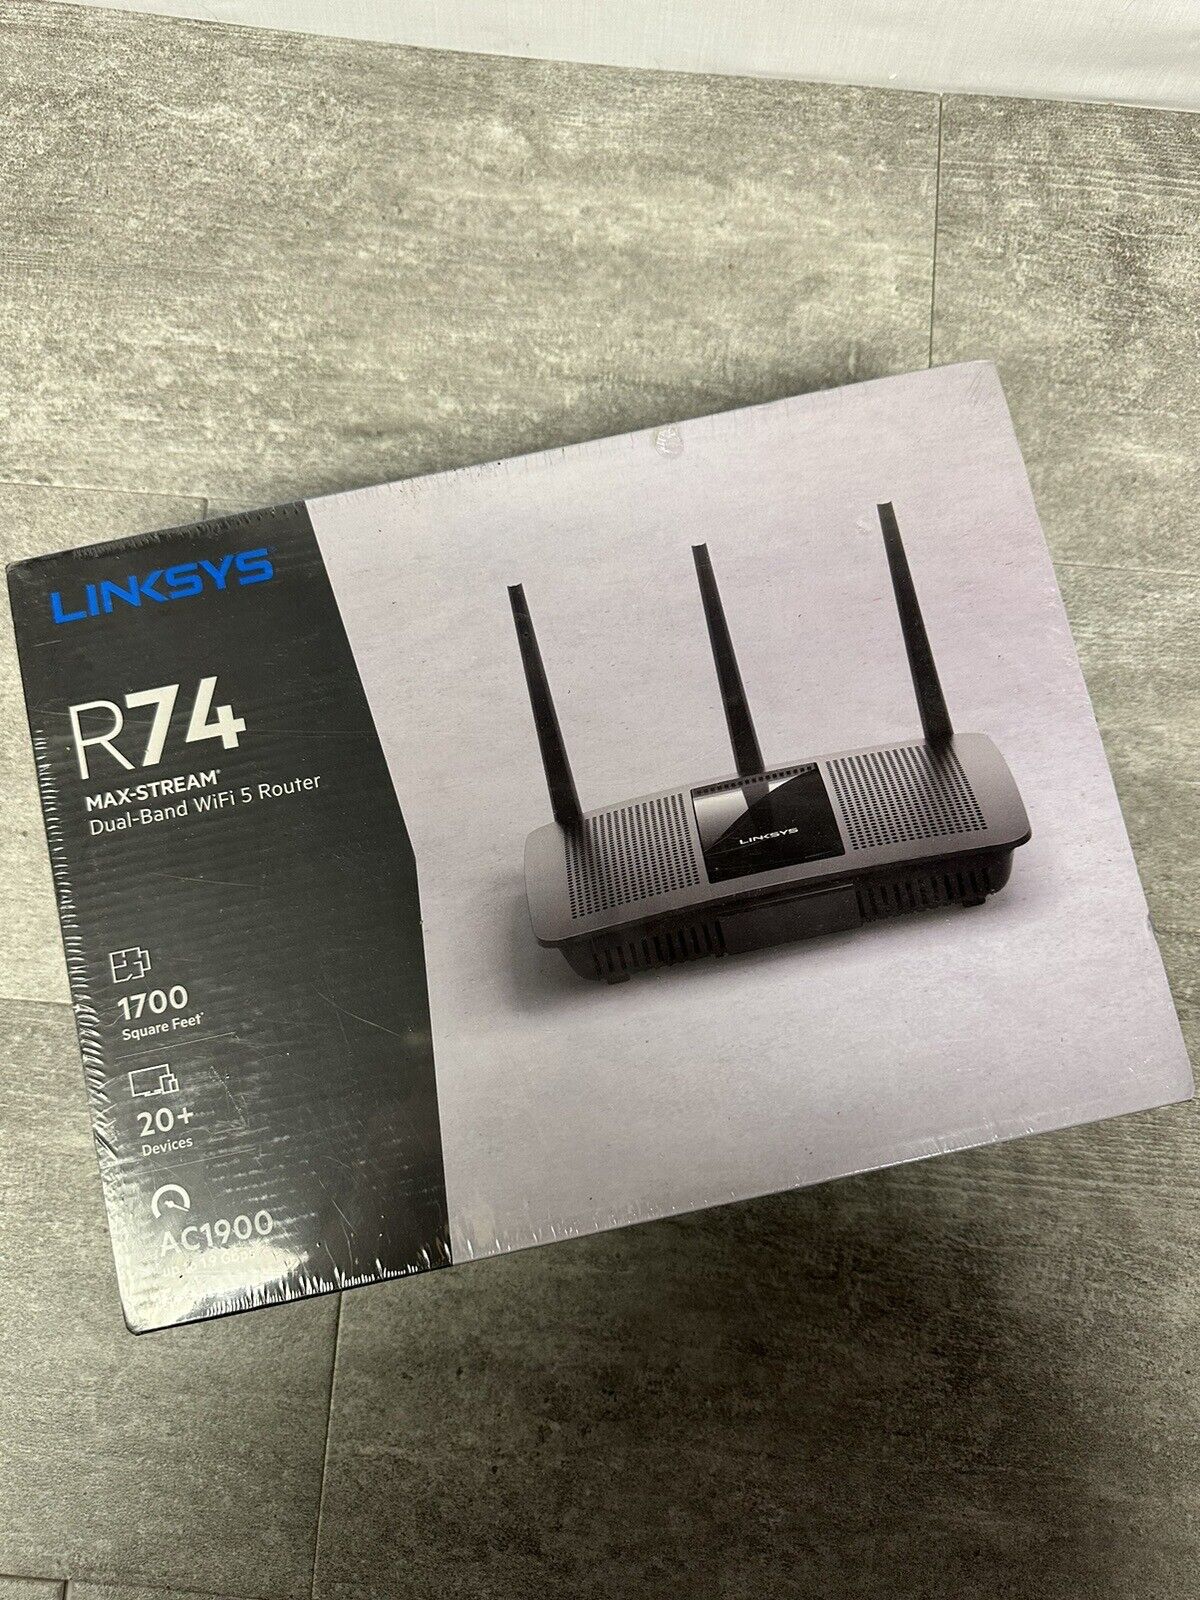 Linksys R74 Max-Stream Dual Band WiFi Router AC1900 (New)